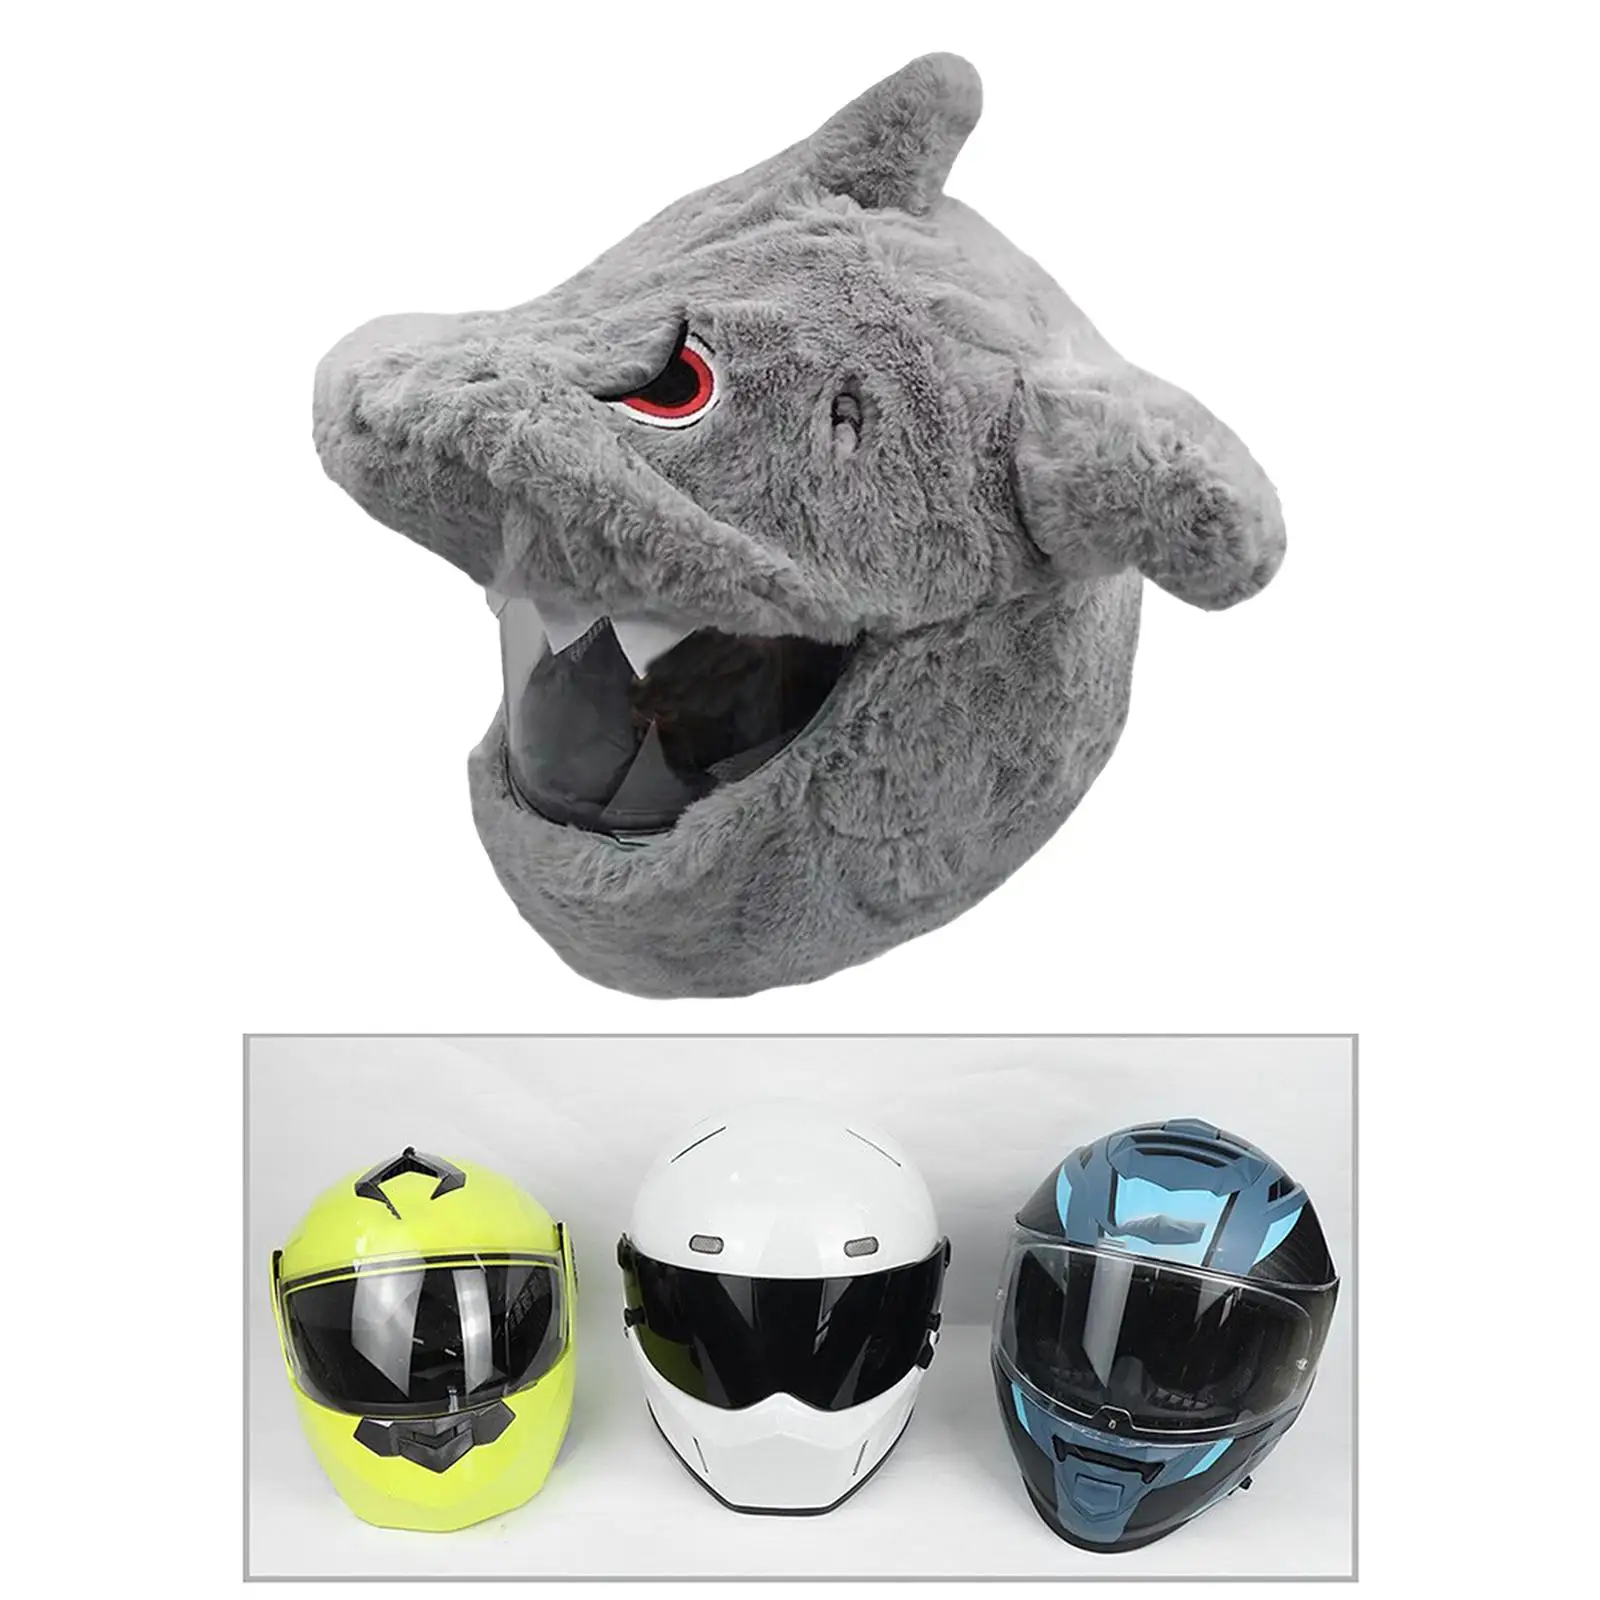 Motorcycle Helmet Cover Dust Cap Fun Riding and Gifts Plush Animal Helmet Covers for Outdoor Riding Girls and Boys Adults